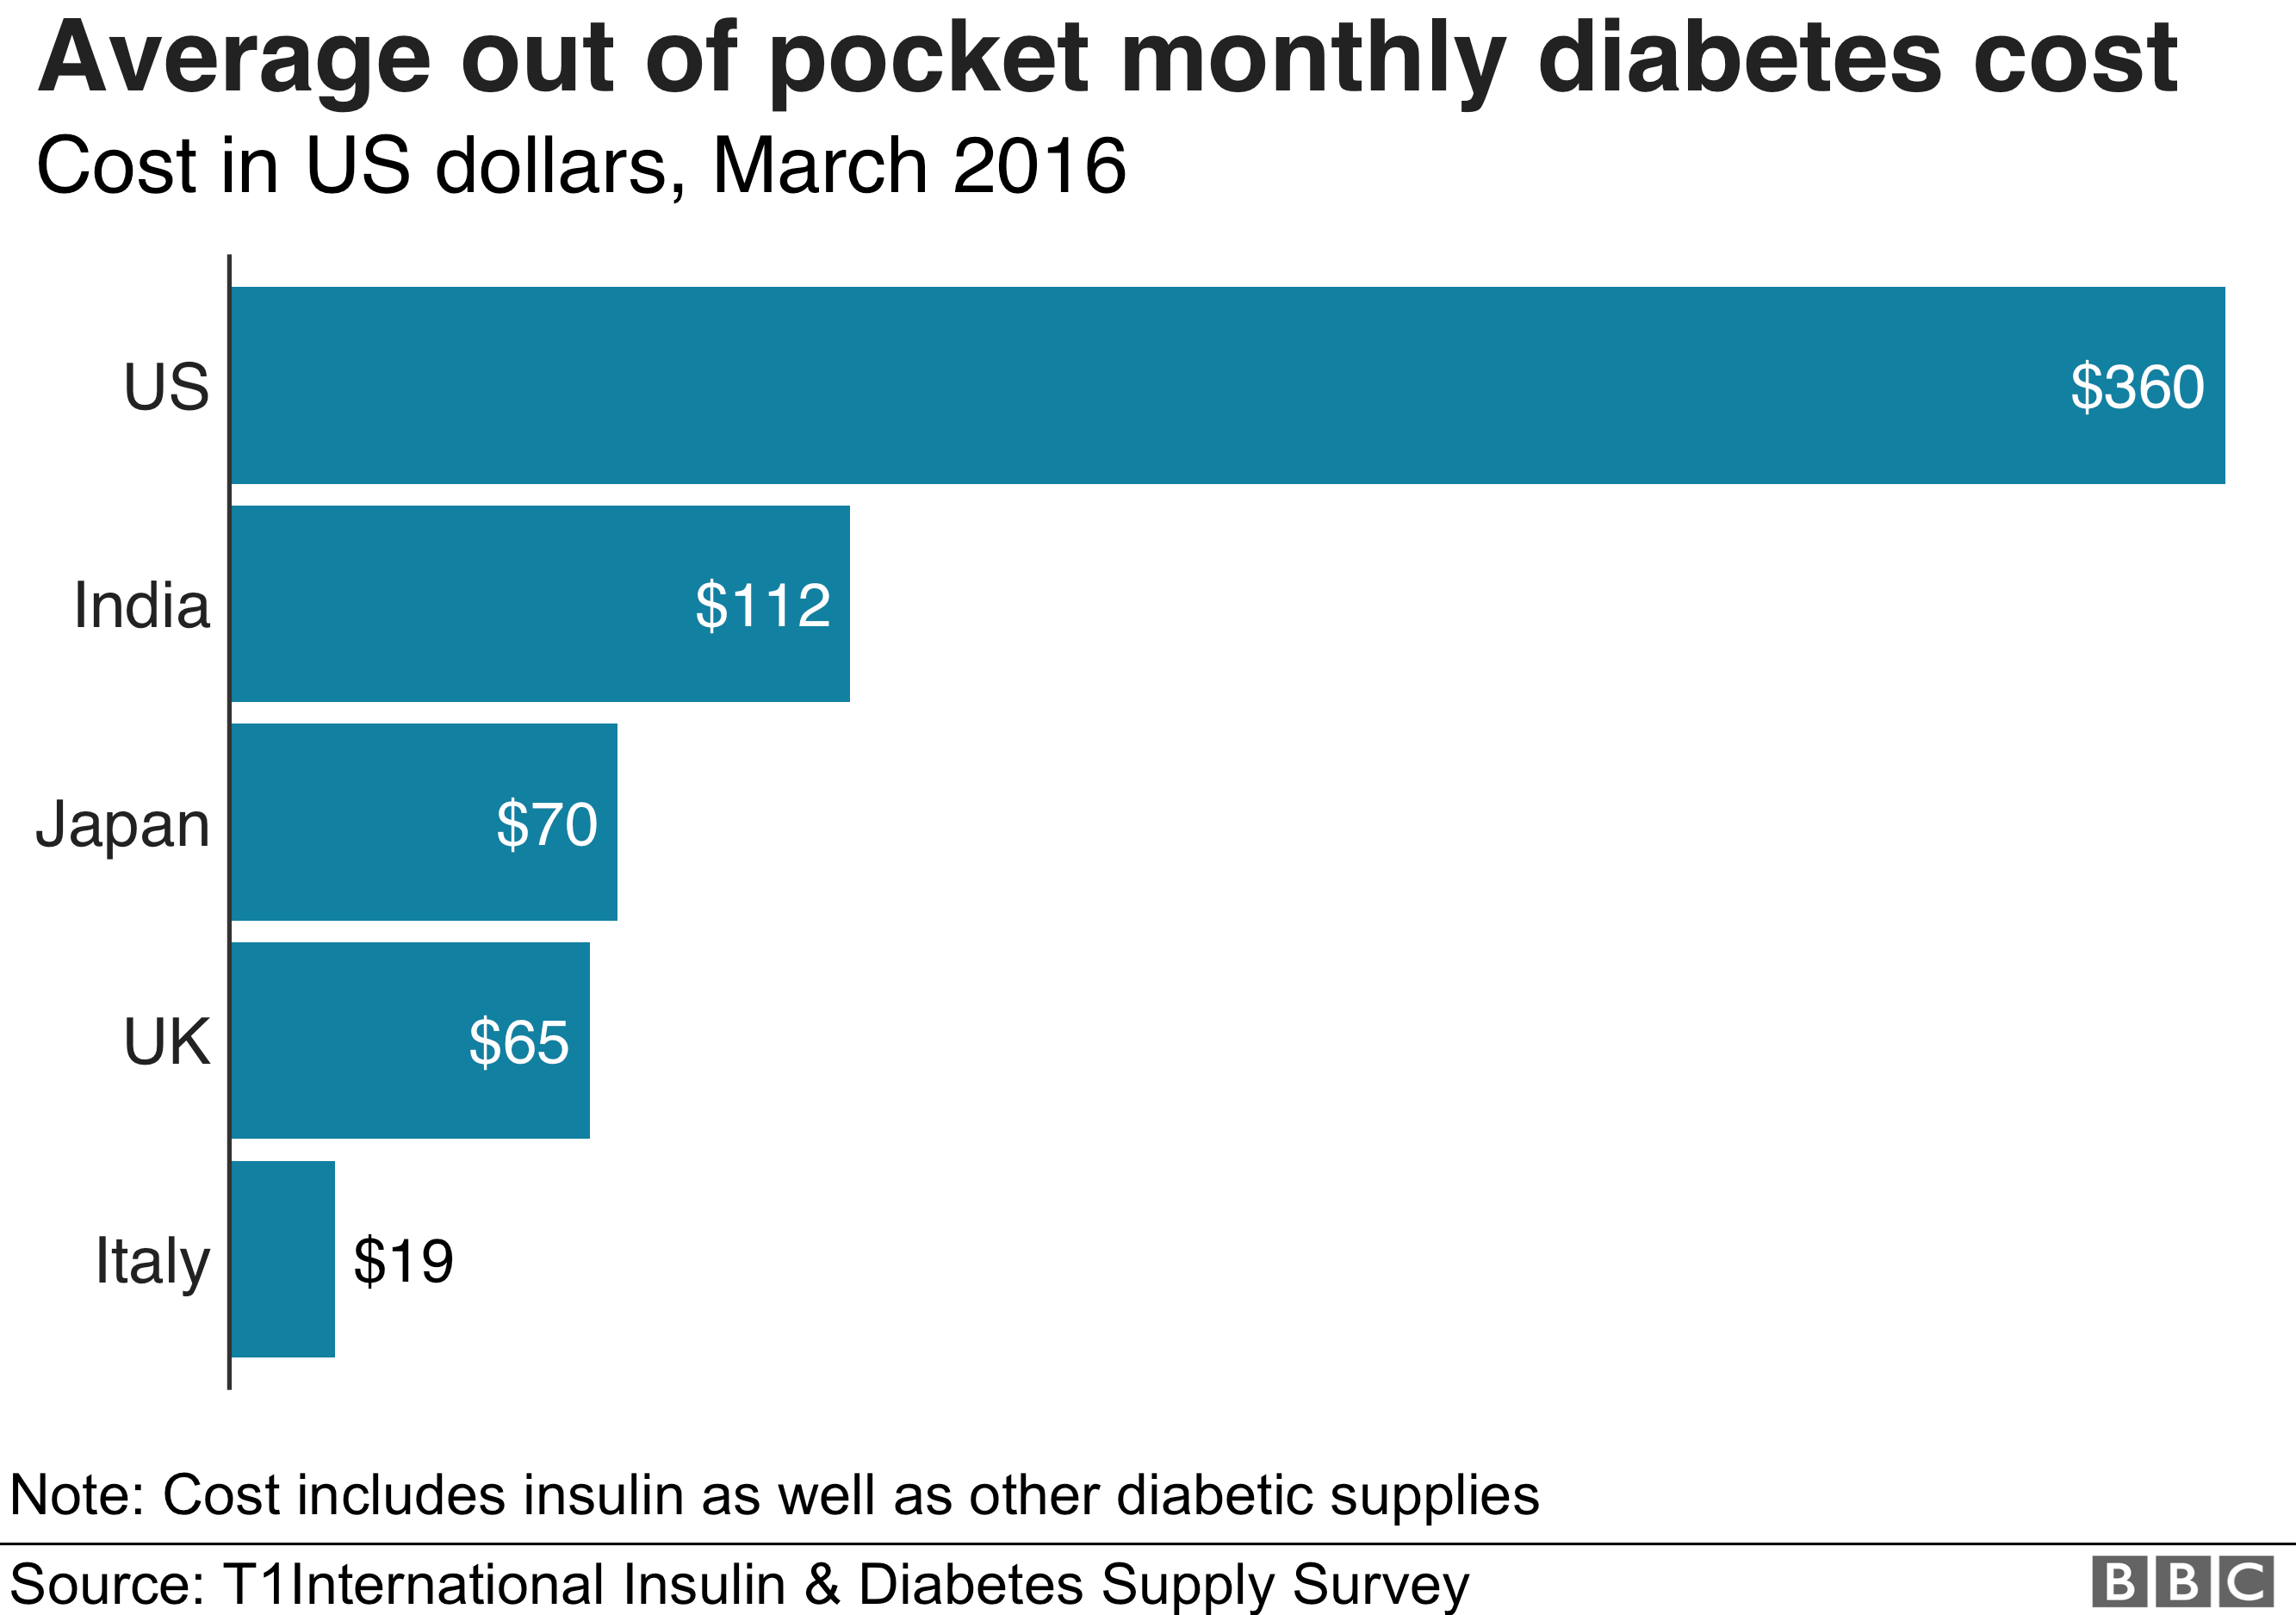 Graph showing average cost for a diabetic (insulin and other supplies) per month in Italy ($19), UK ($65), Japan ($70), India ($112) and US ($360)